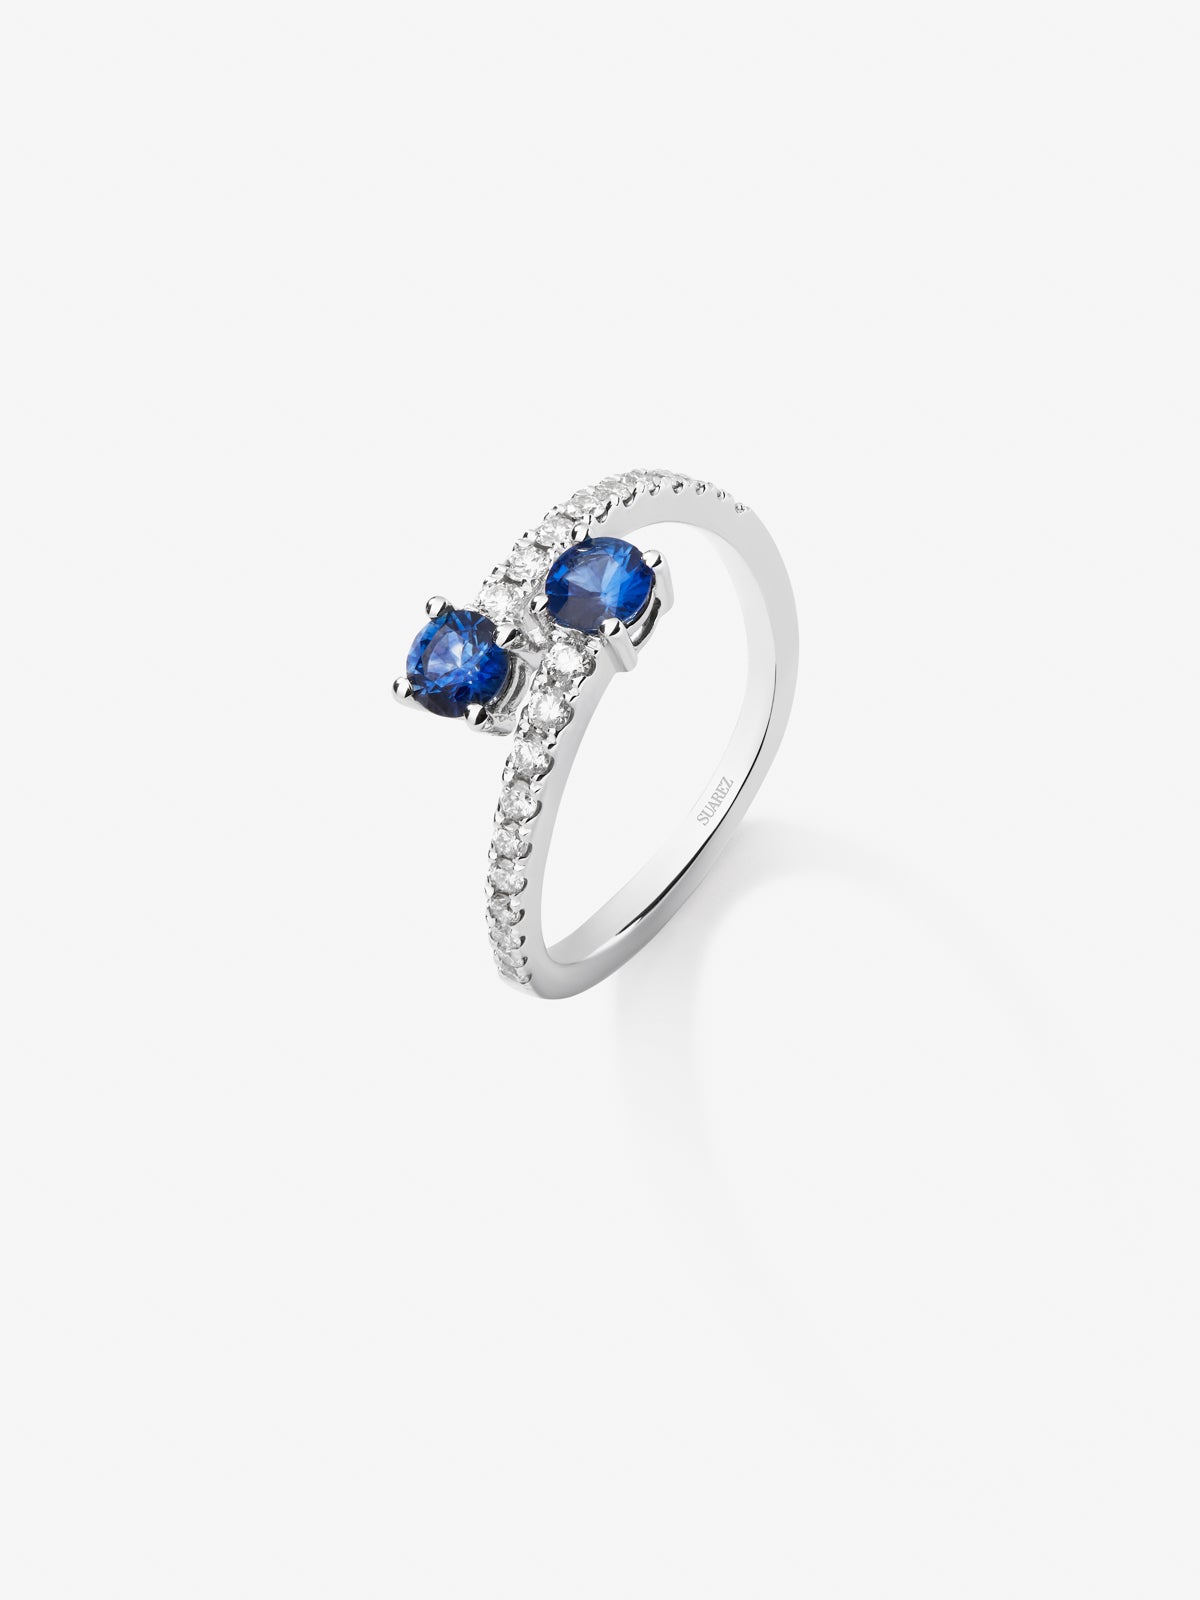 You and me ring in 18K white gold with 2 brilliant-cut sapphires with a total of 0.94 cts and 14 brilliant-cut diamonds with a total of 0.43 cts